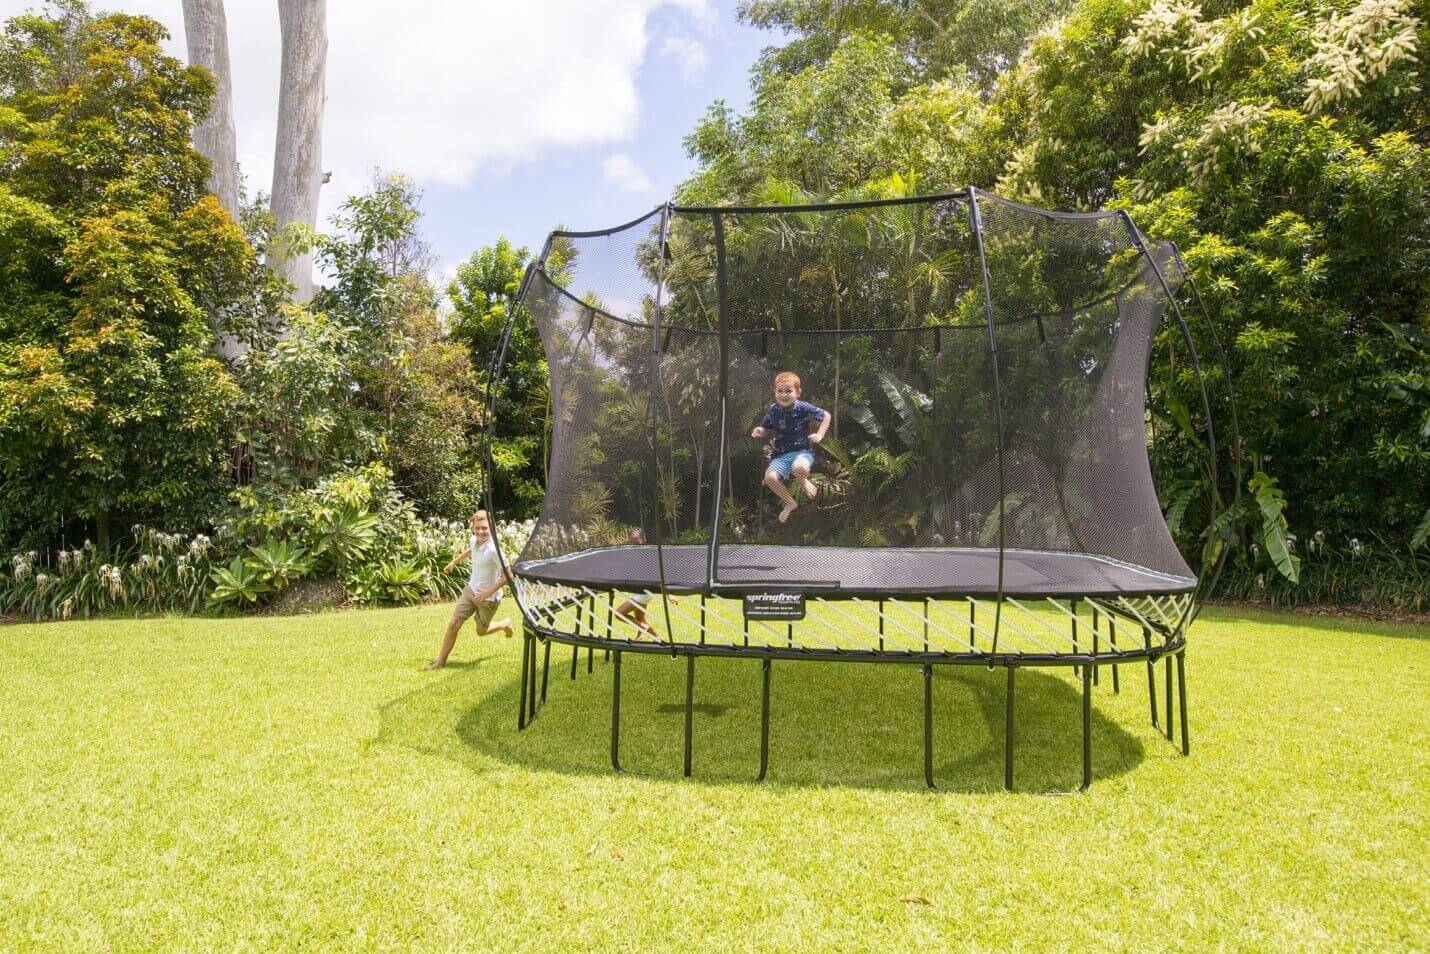 Kid jumping on a Springfree Jumbo Square Trampoline while two other kids chase each other right outside of the trampoline